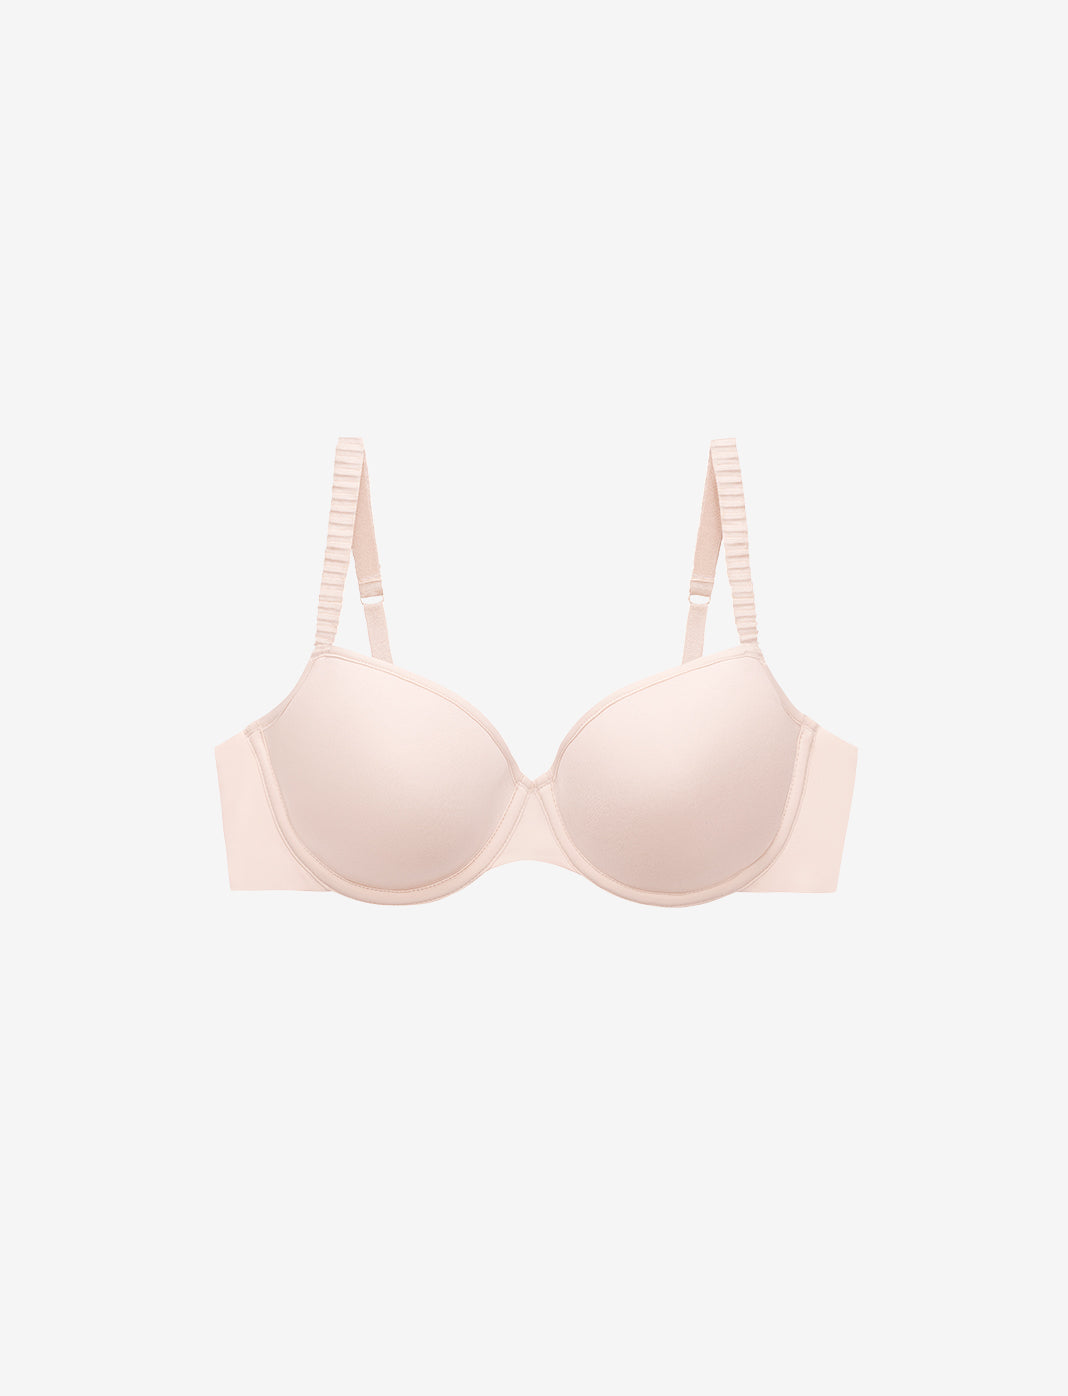 Buy online Pink Push Up Bra from lingerie for Women by Gstring for